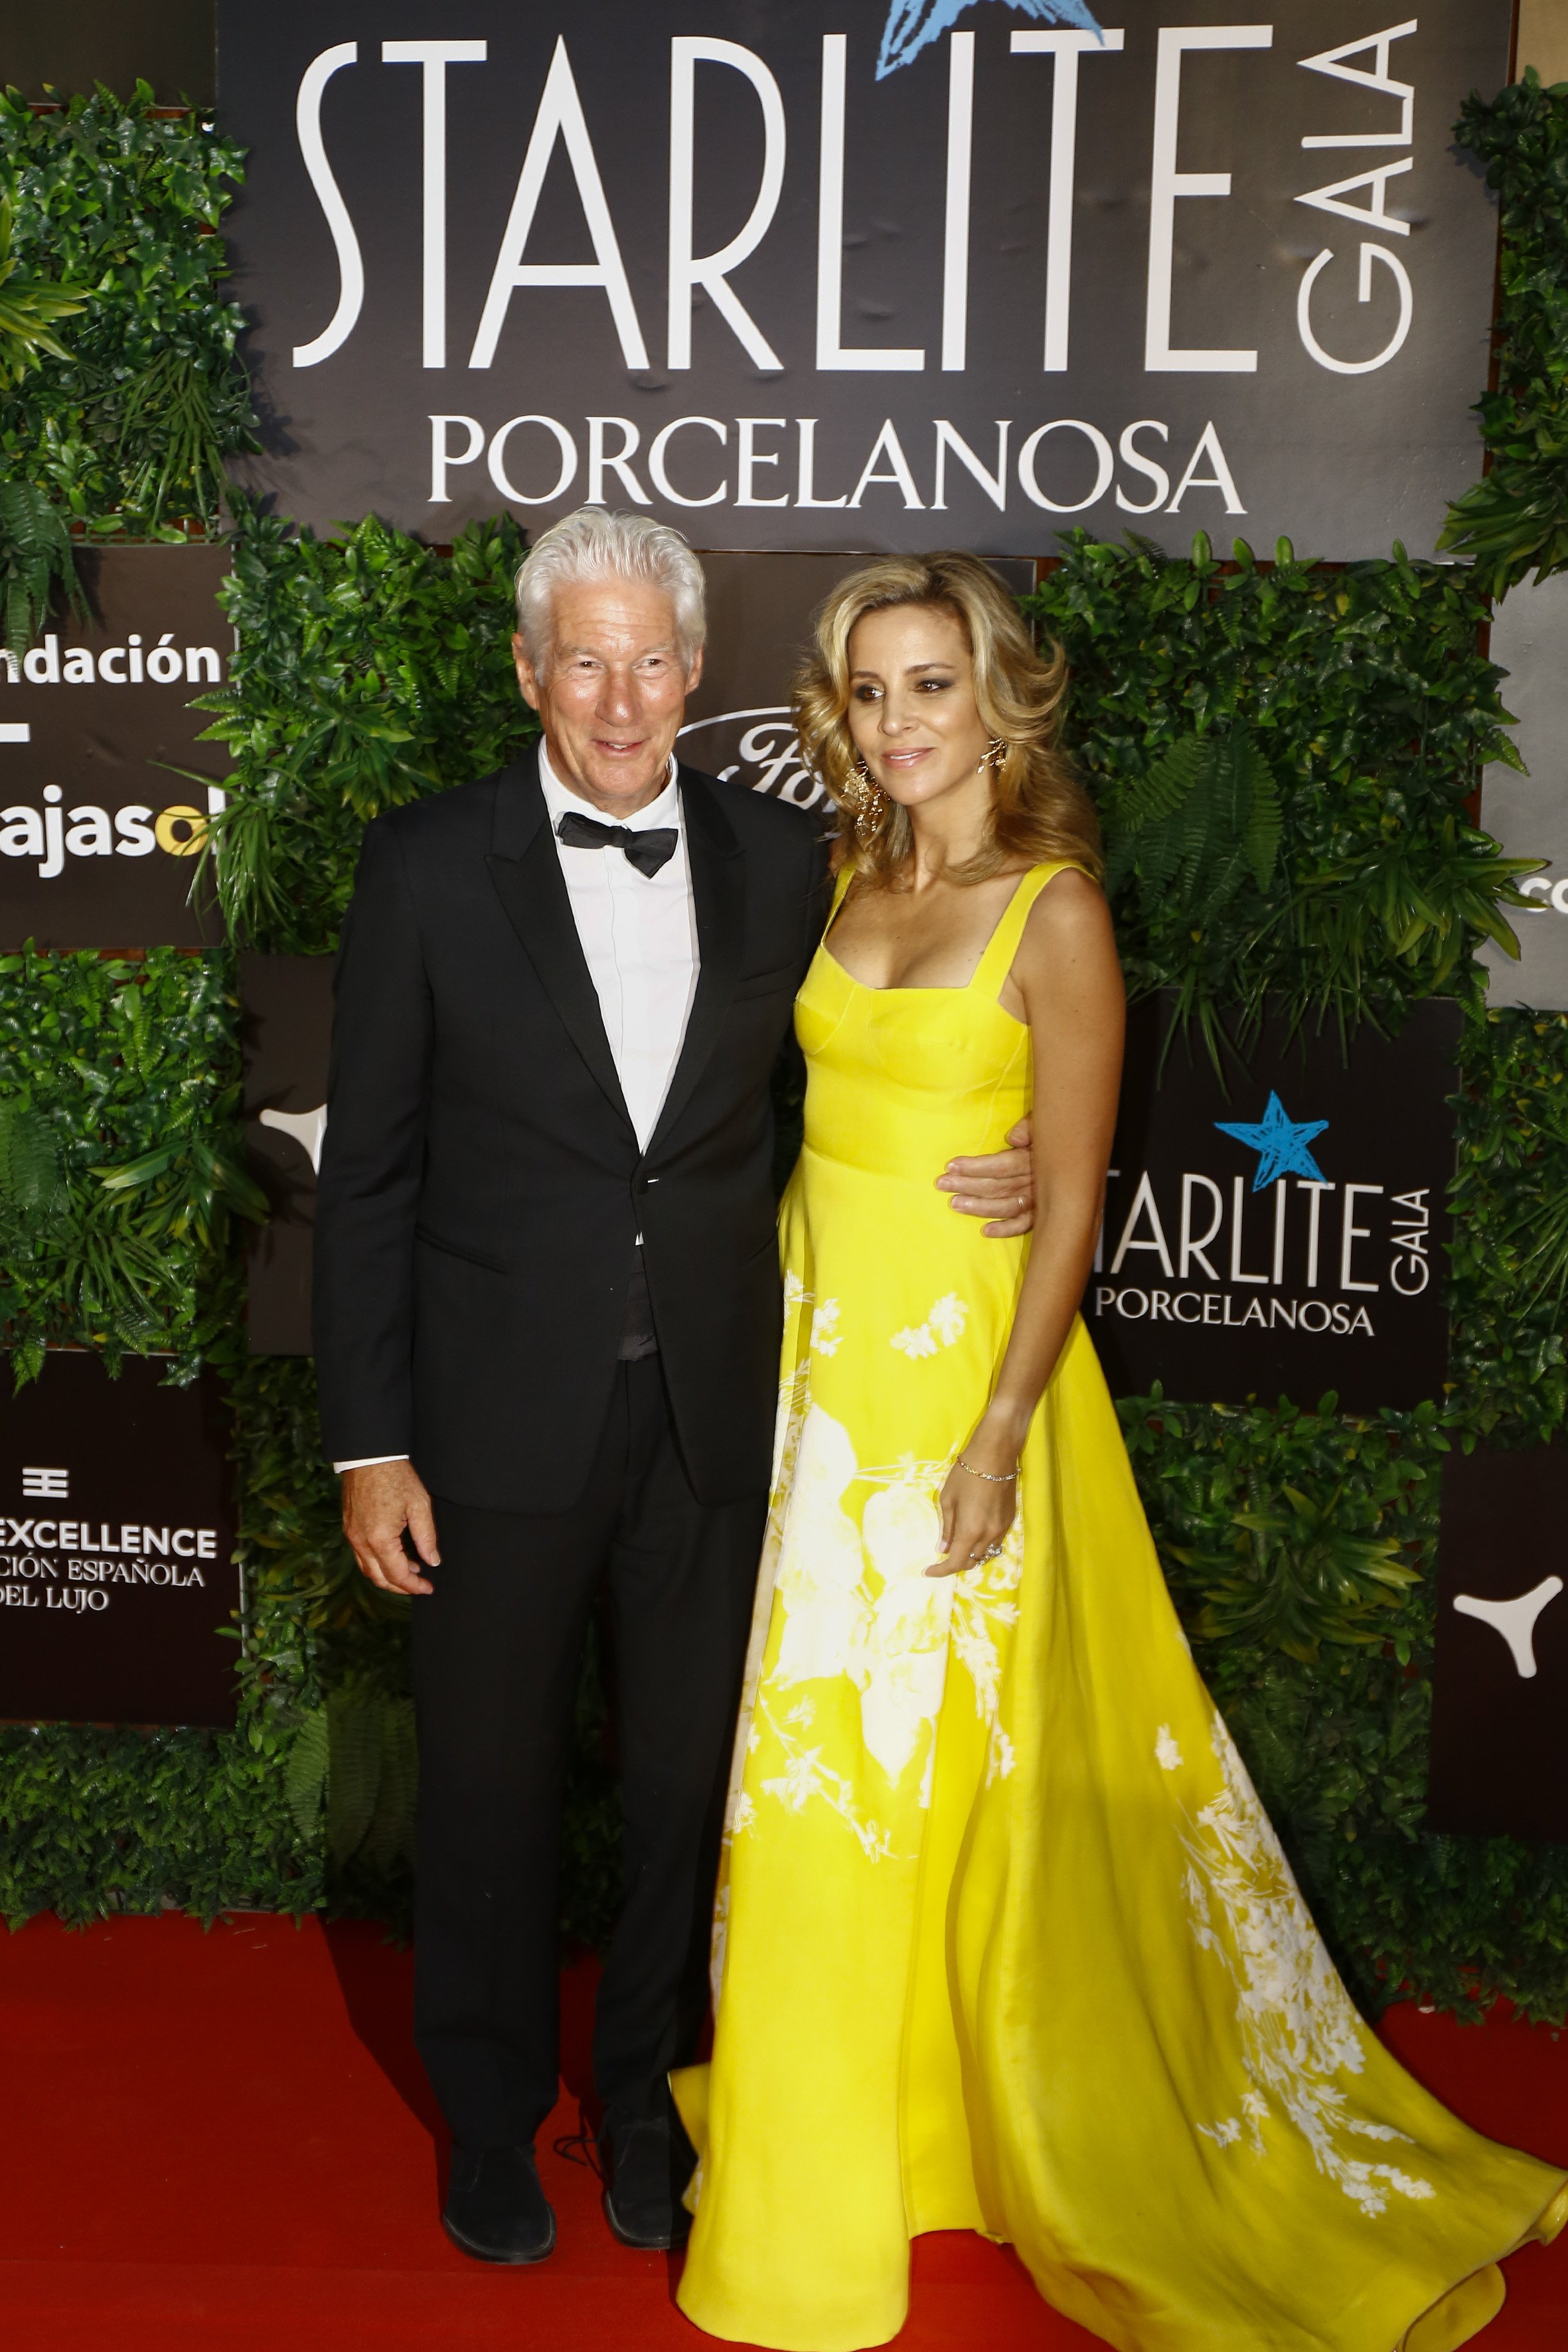 Richard Gere and Alejandra Silva at La Cantera on August 14, 2022 in Marbella, Spain | Source: Getty Images